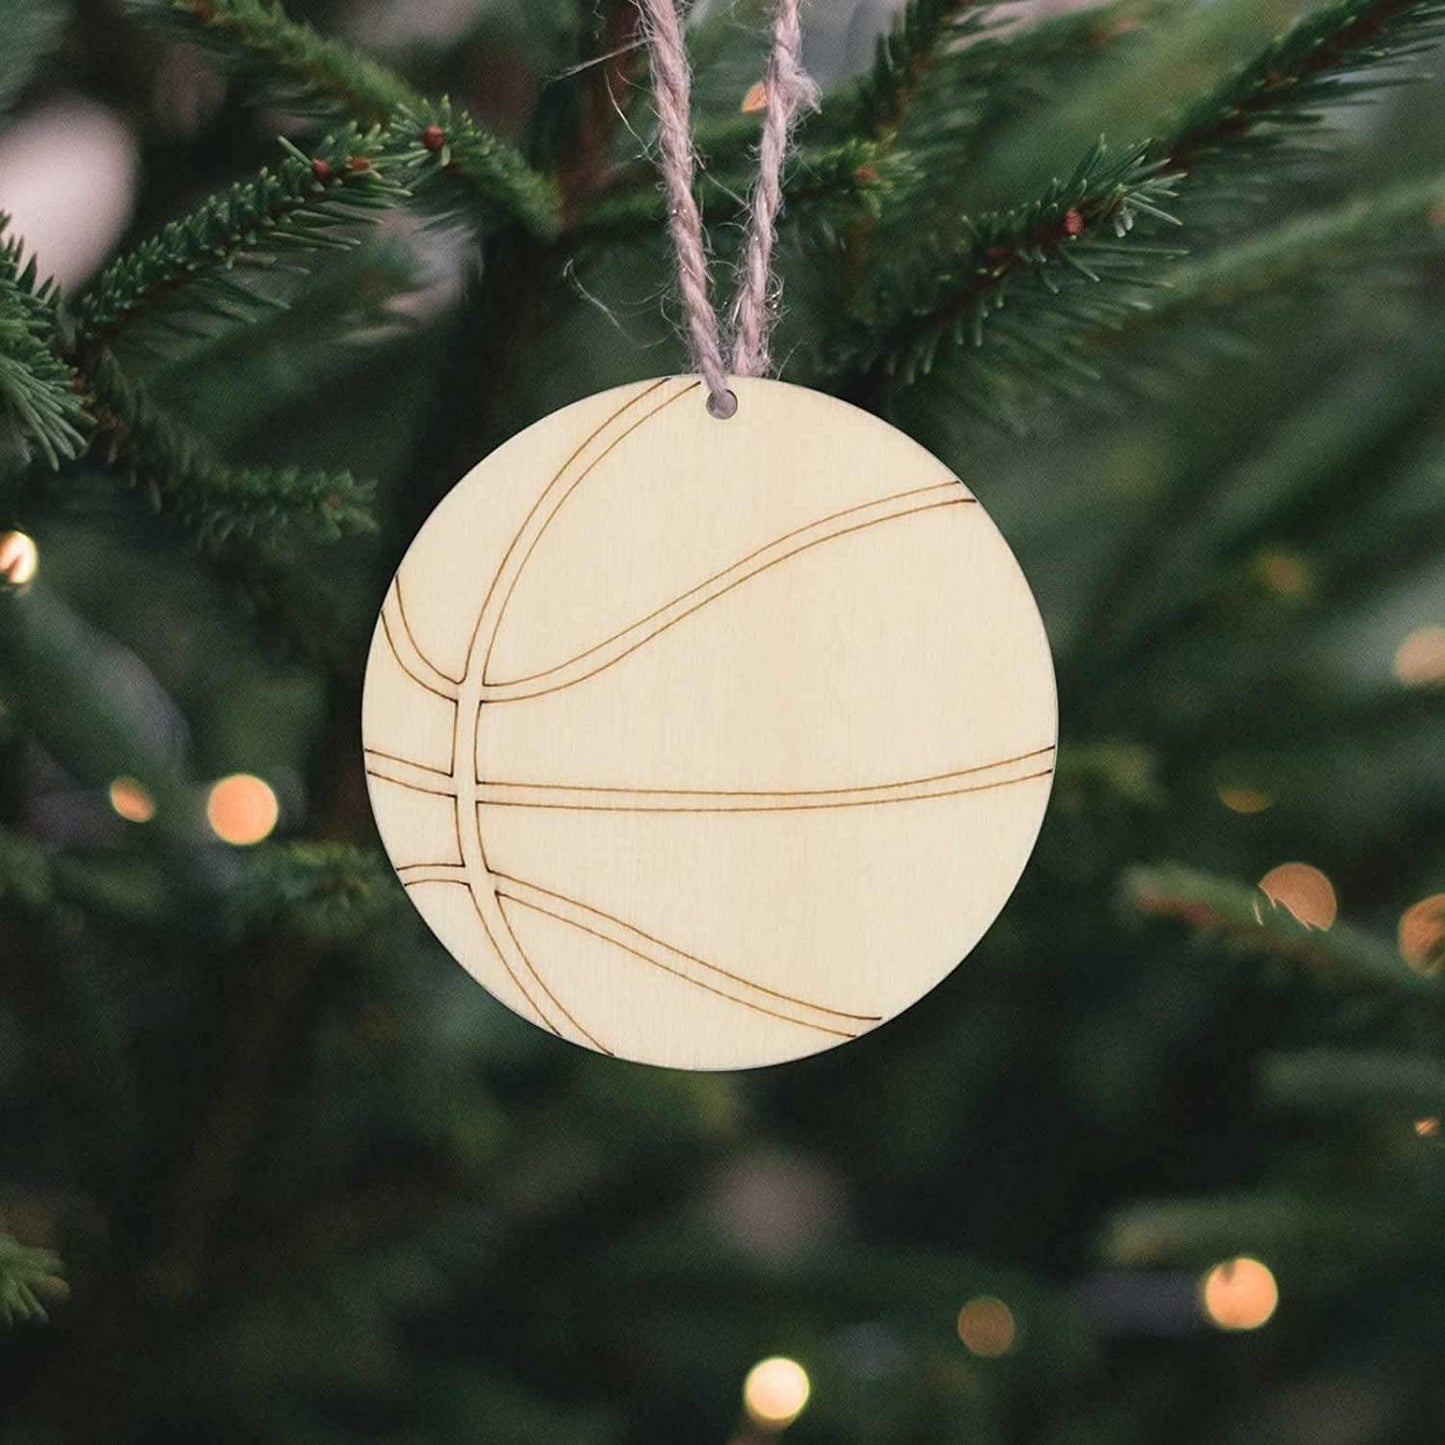 20Pcs Basketball Wood DIY Crafts Cutouts Wooden Basketball Shaped Hanging Ornaments Gift Tags with Twines for DIY Project - WoodArtSupply